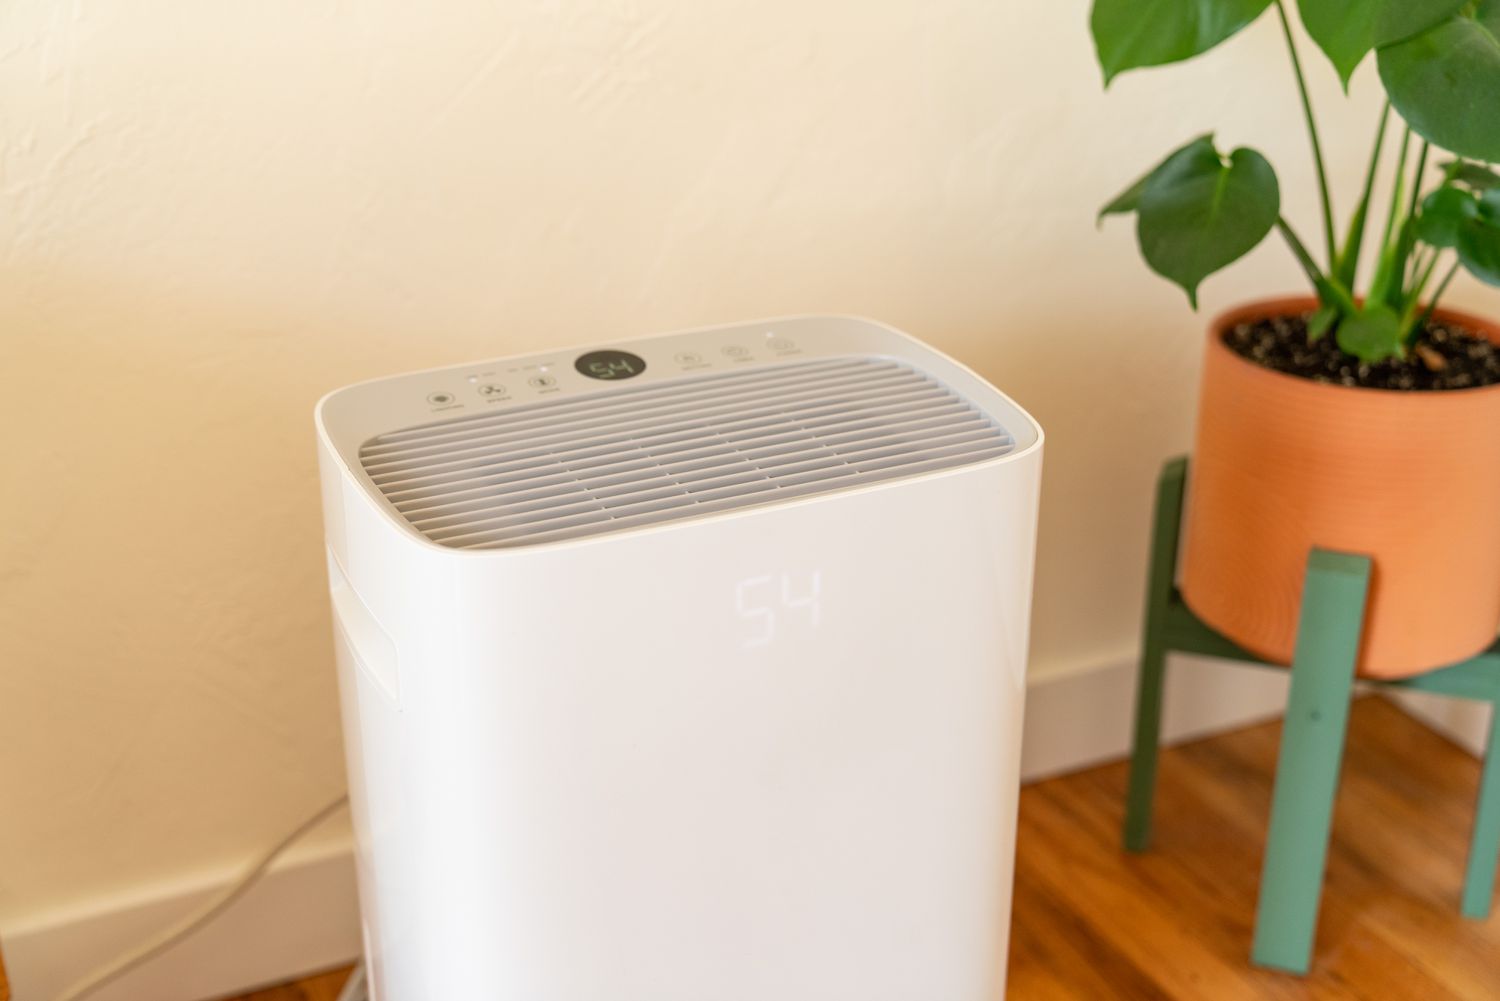 Where Does the Moisture Go in a Portable Air Conditioner